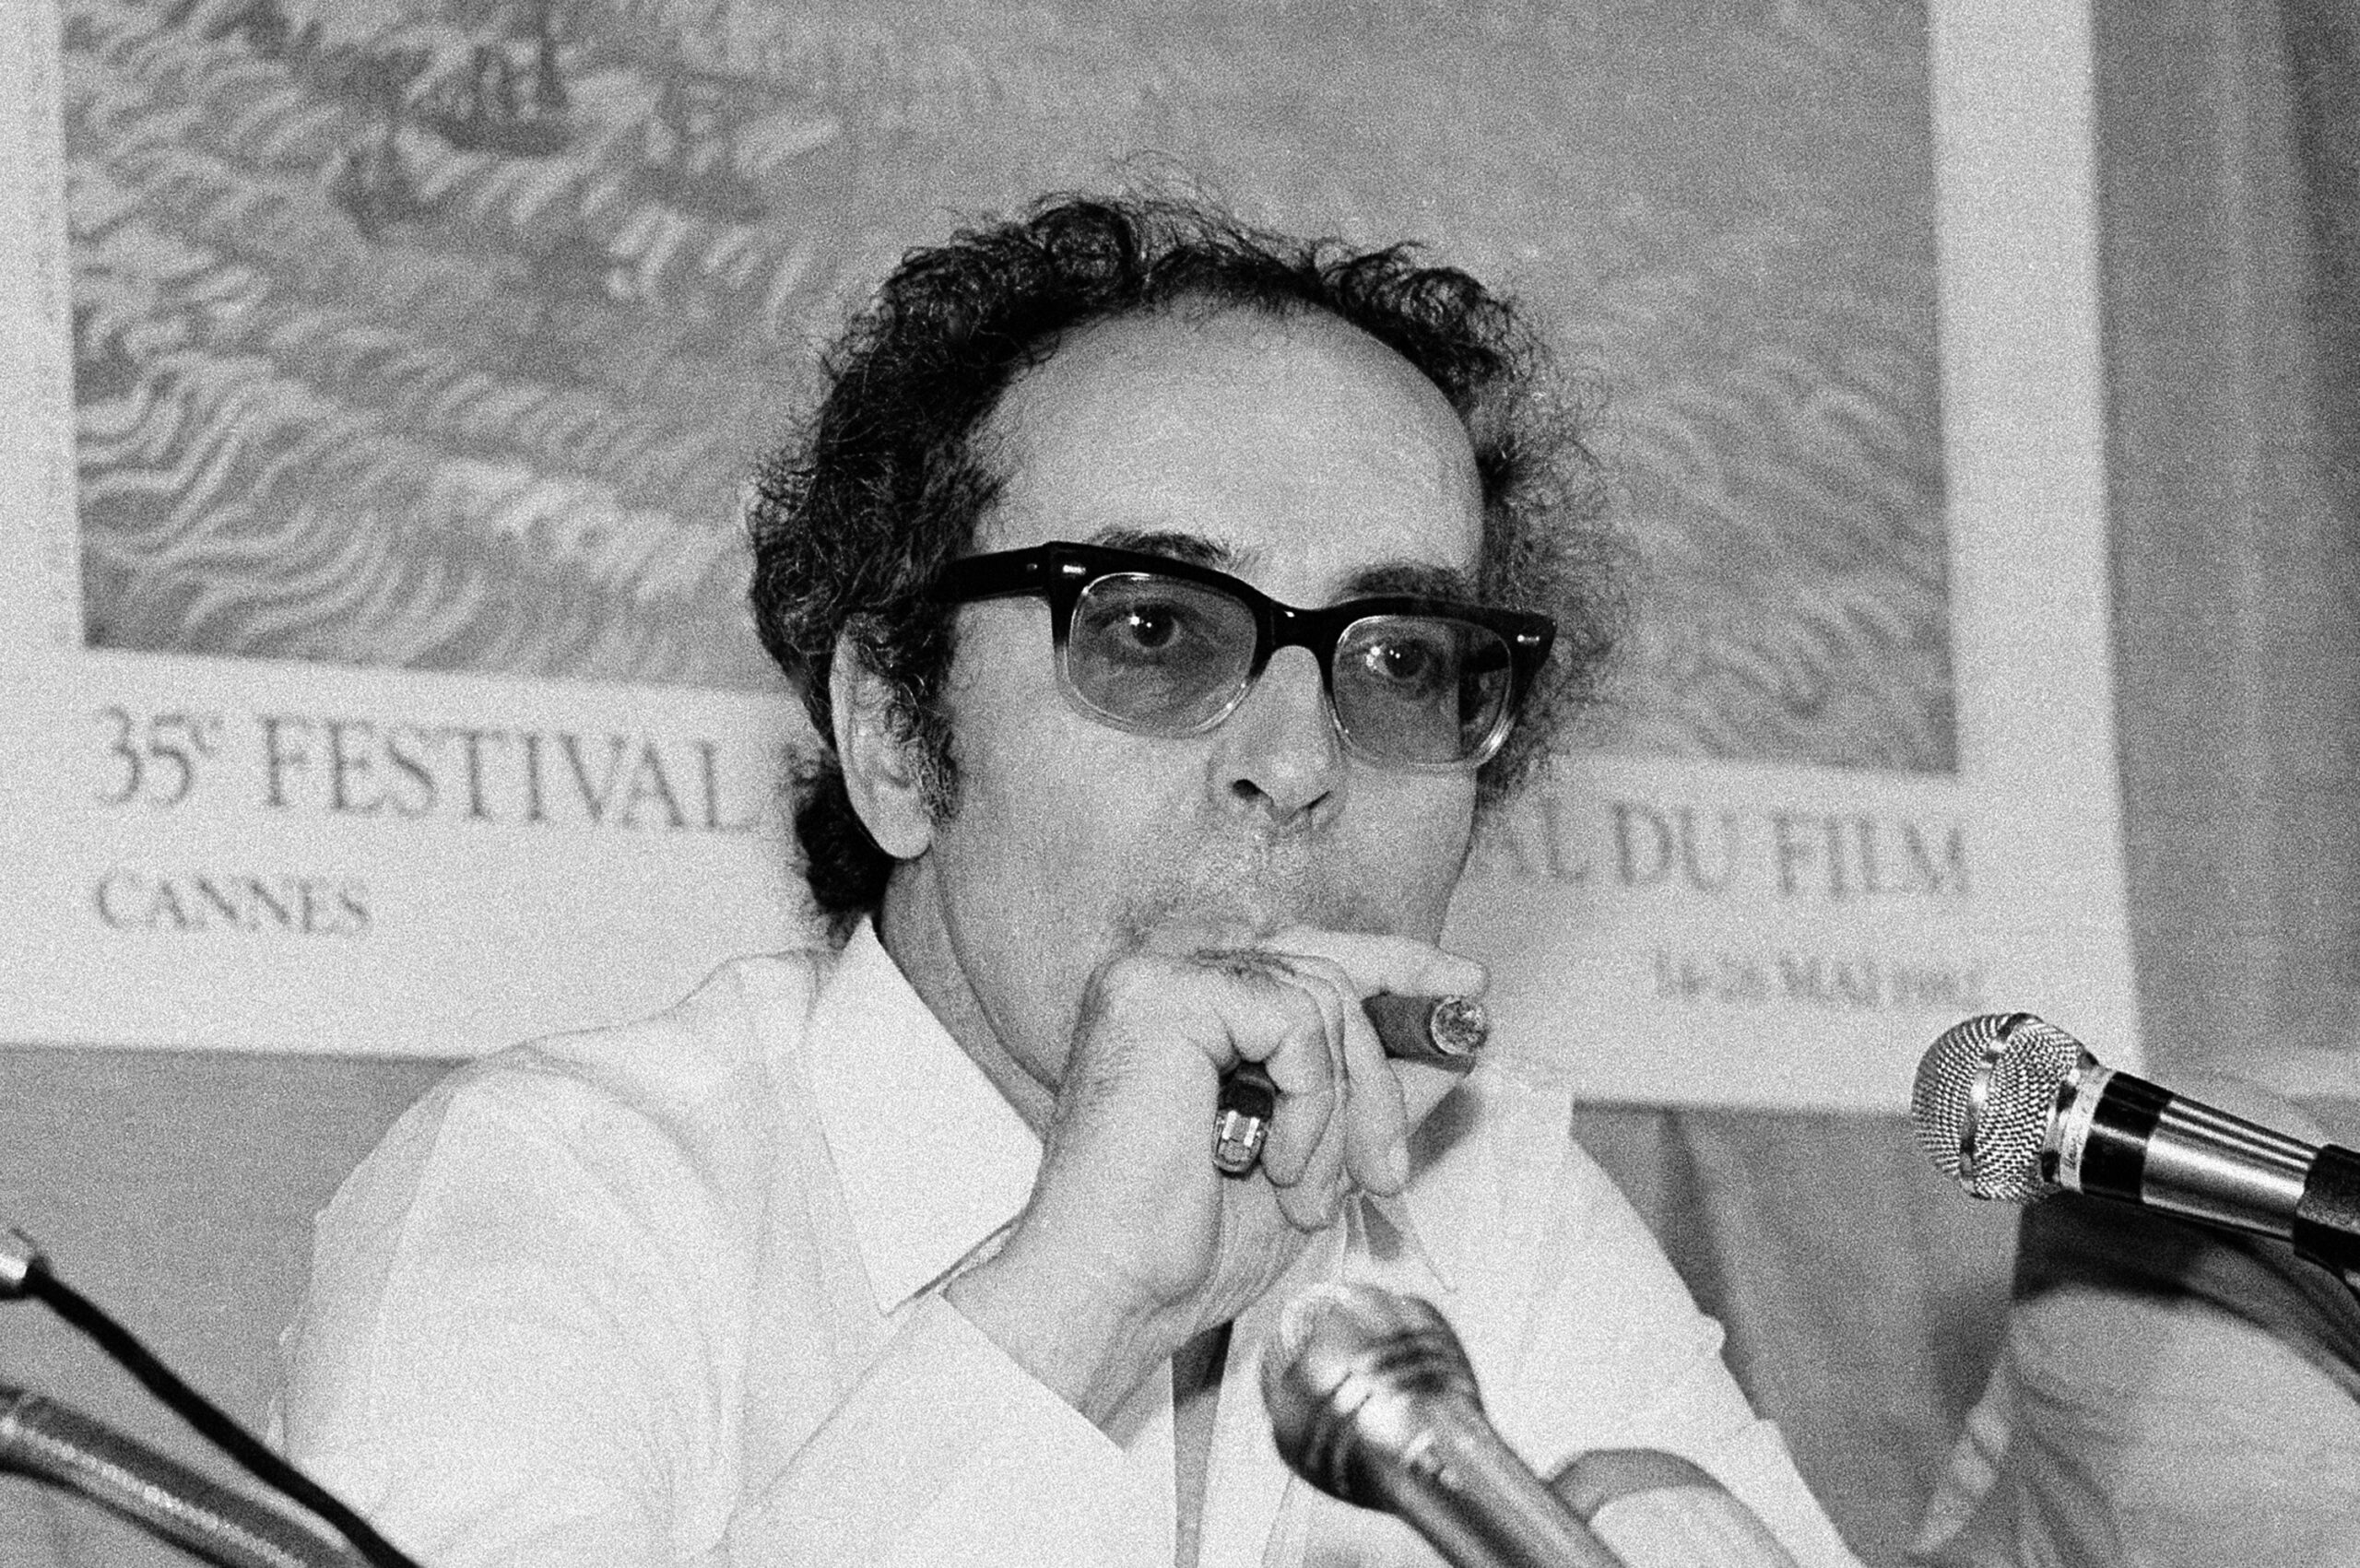 FILE - Film director Jean-Luc Godard smokes at Cannes festival, France on May 25, 1982. Director Jean-Luc Godard, an icon of French New Wave film who revolutionized popular 1960s cinema, has died, according to French media. He was 91. Born into a wealthy French-Swiss family on Dec. 3, 1930, in Paris, the ingenious "enfant terrible" stood for years as one of the world's most vital and provocative directors in Europe and beyond — beginning in 1960 with his debut feature "Breathless." (AP Photo/Jean-Jacques Levy, File)